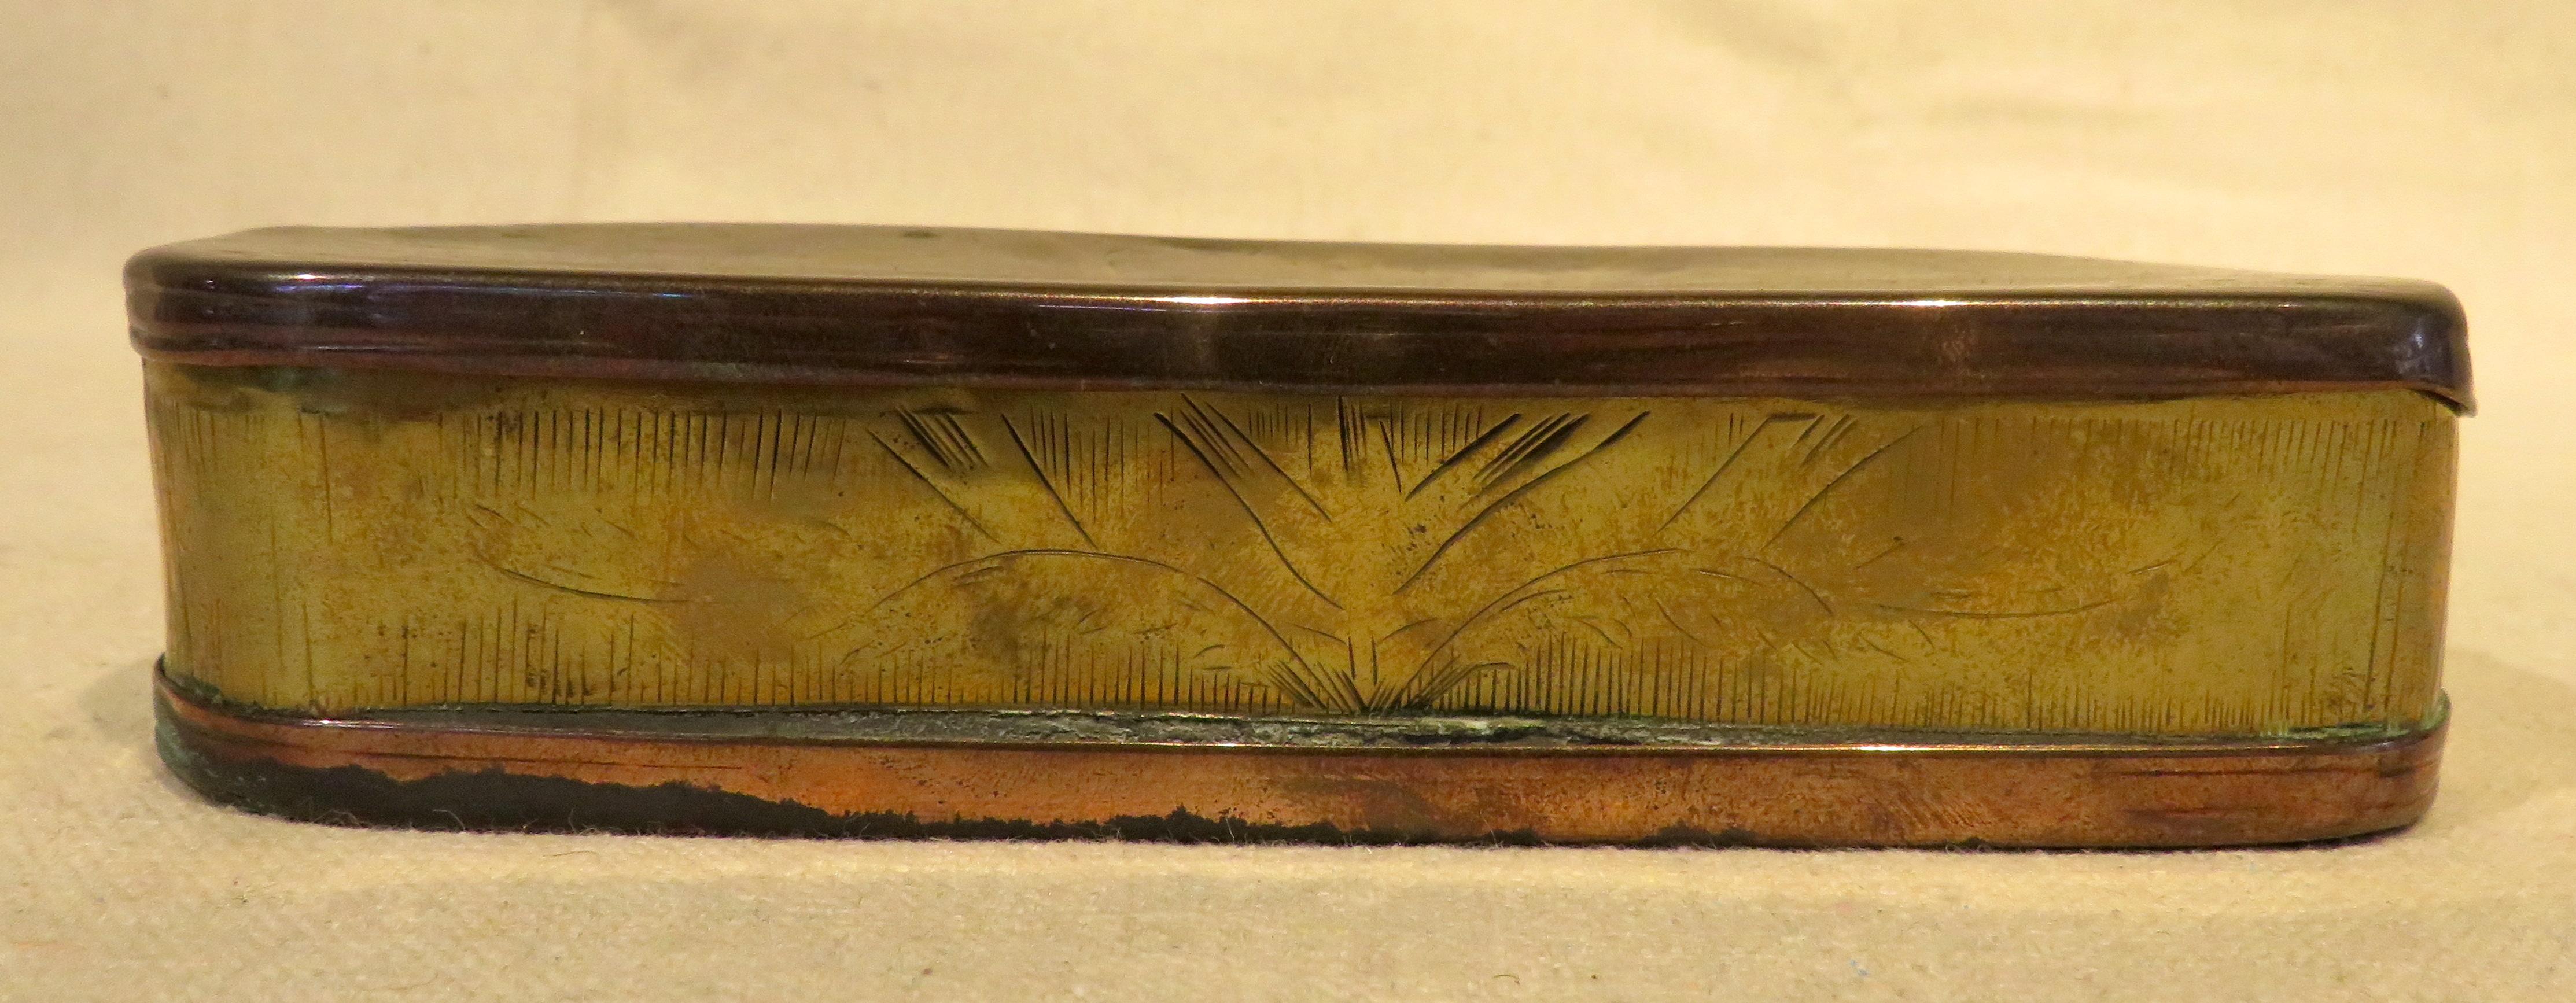 Engraved Brass and Copper Snuff Box, English, Circa 1850 In Good Condition For Sale In Nantucket, MA